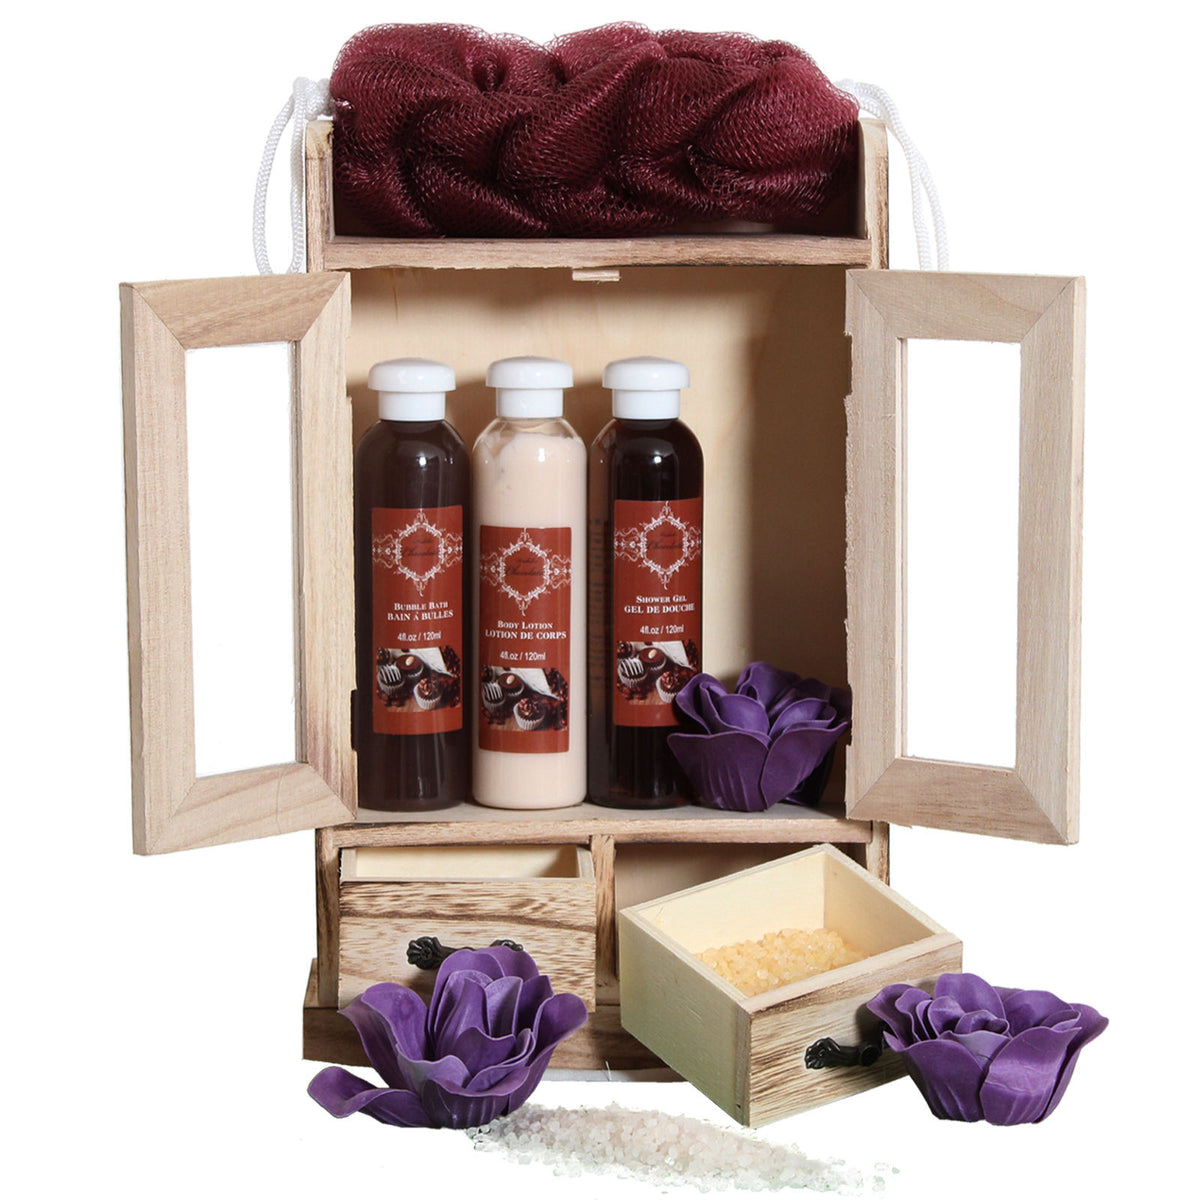 10 Pieces BRUBAKER Beauty Gift Set Women's Bath Set Wooden Cabinet - Many  Fragrances BRUBAKER Cosmetics , we'll work with you to determine the most  suitable solution to your requirements